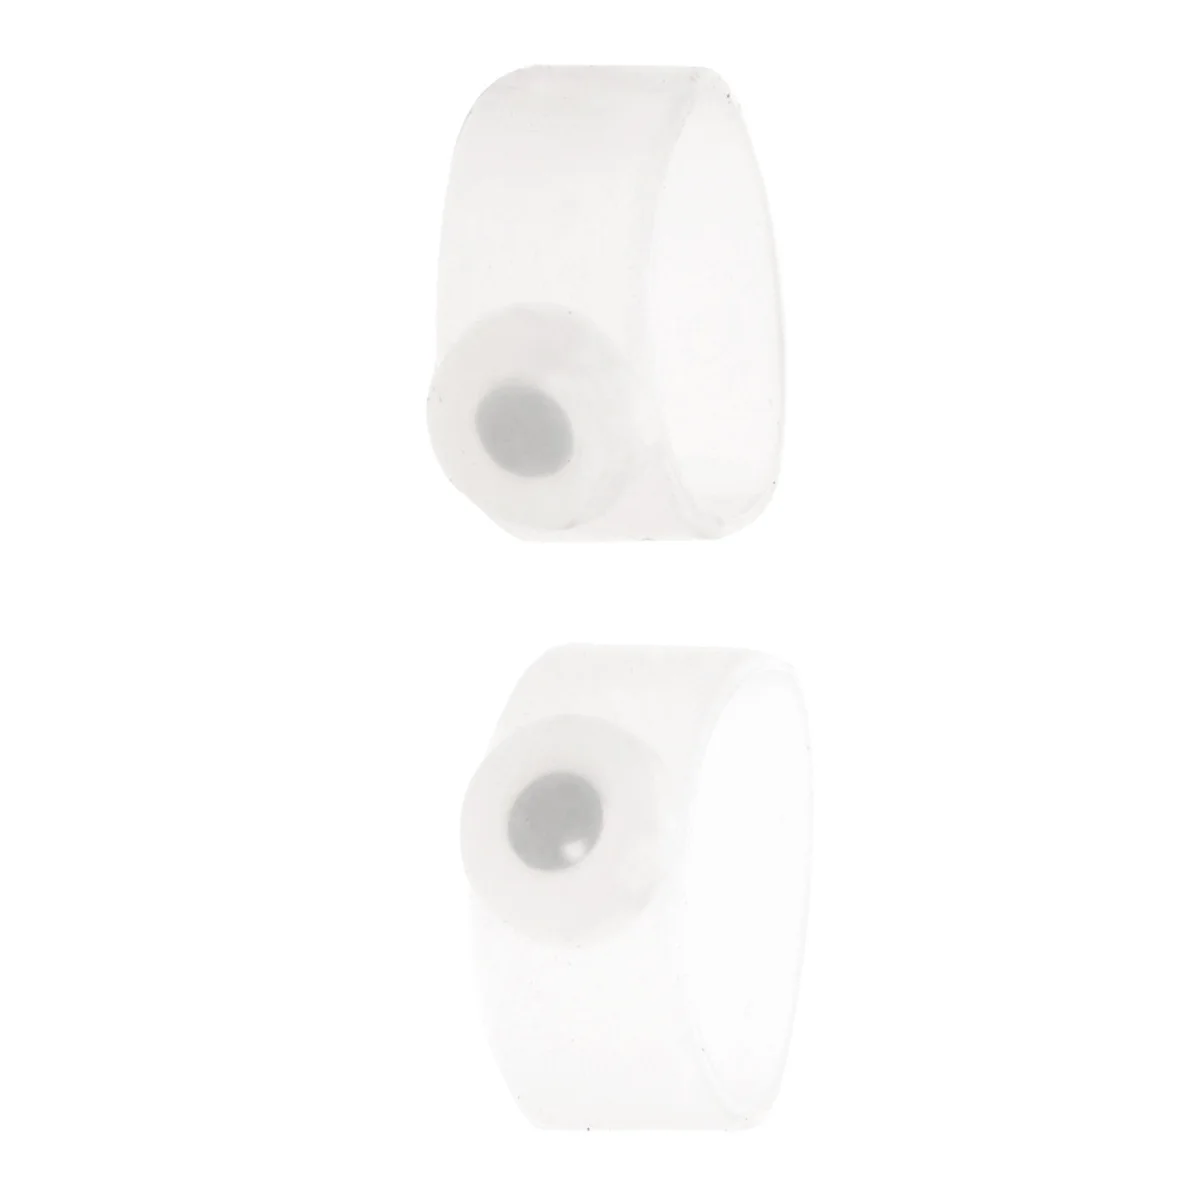 

Body Slimming Healthy Silicone Magnetic Toe Rings - One Pair (Translucent White) Feet